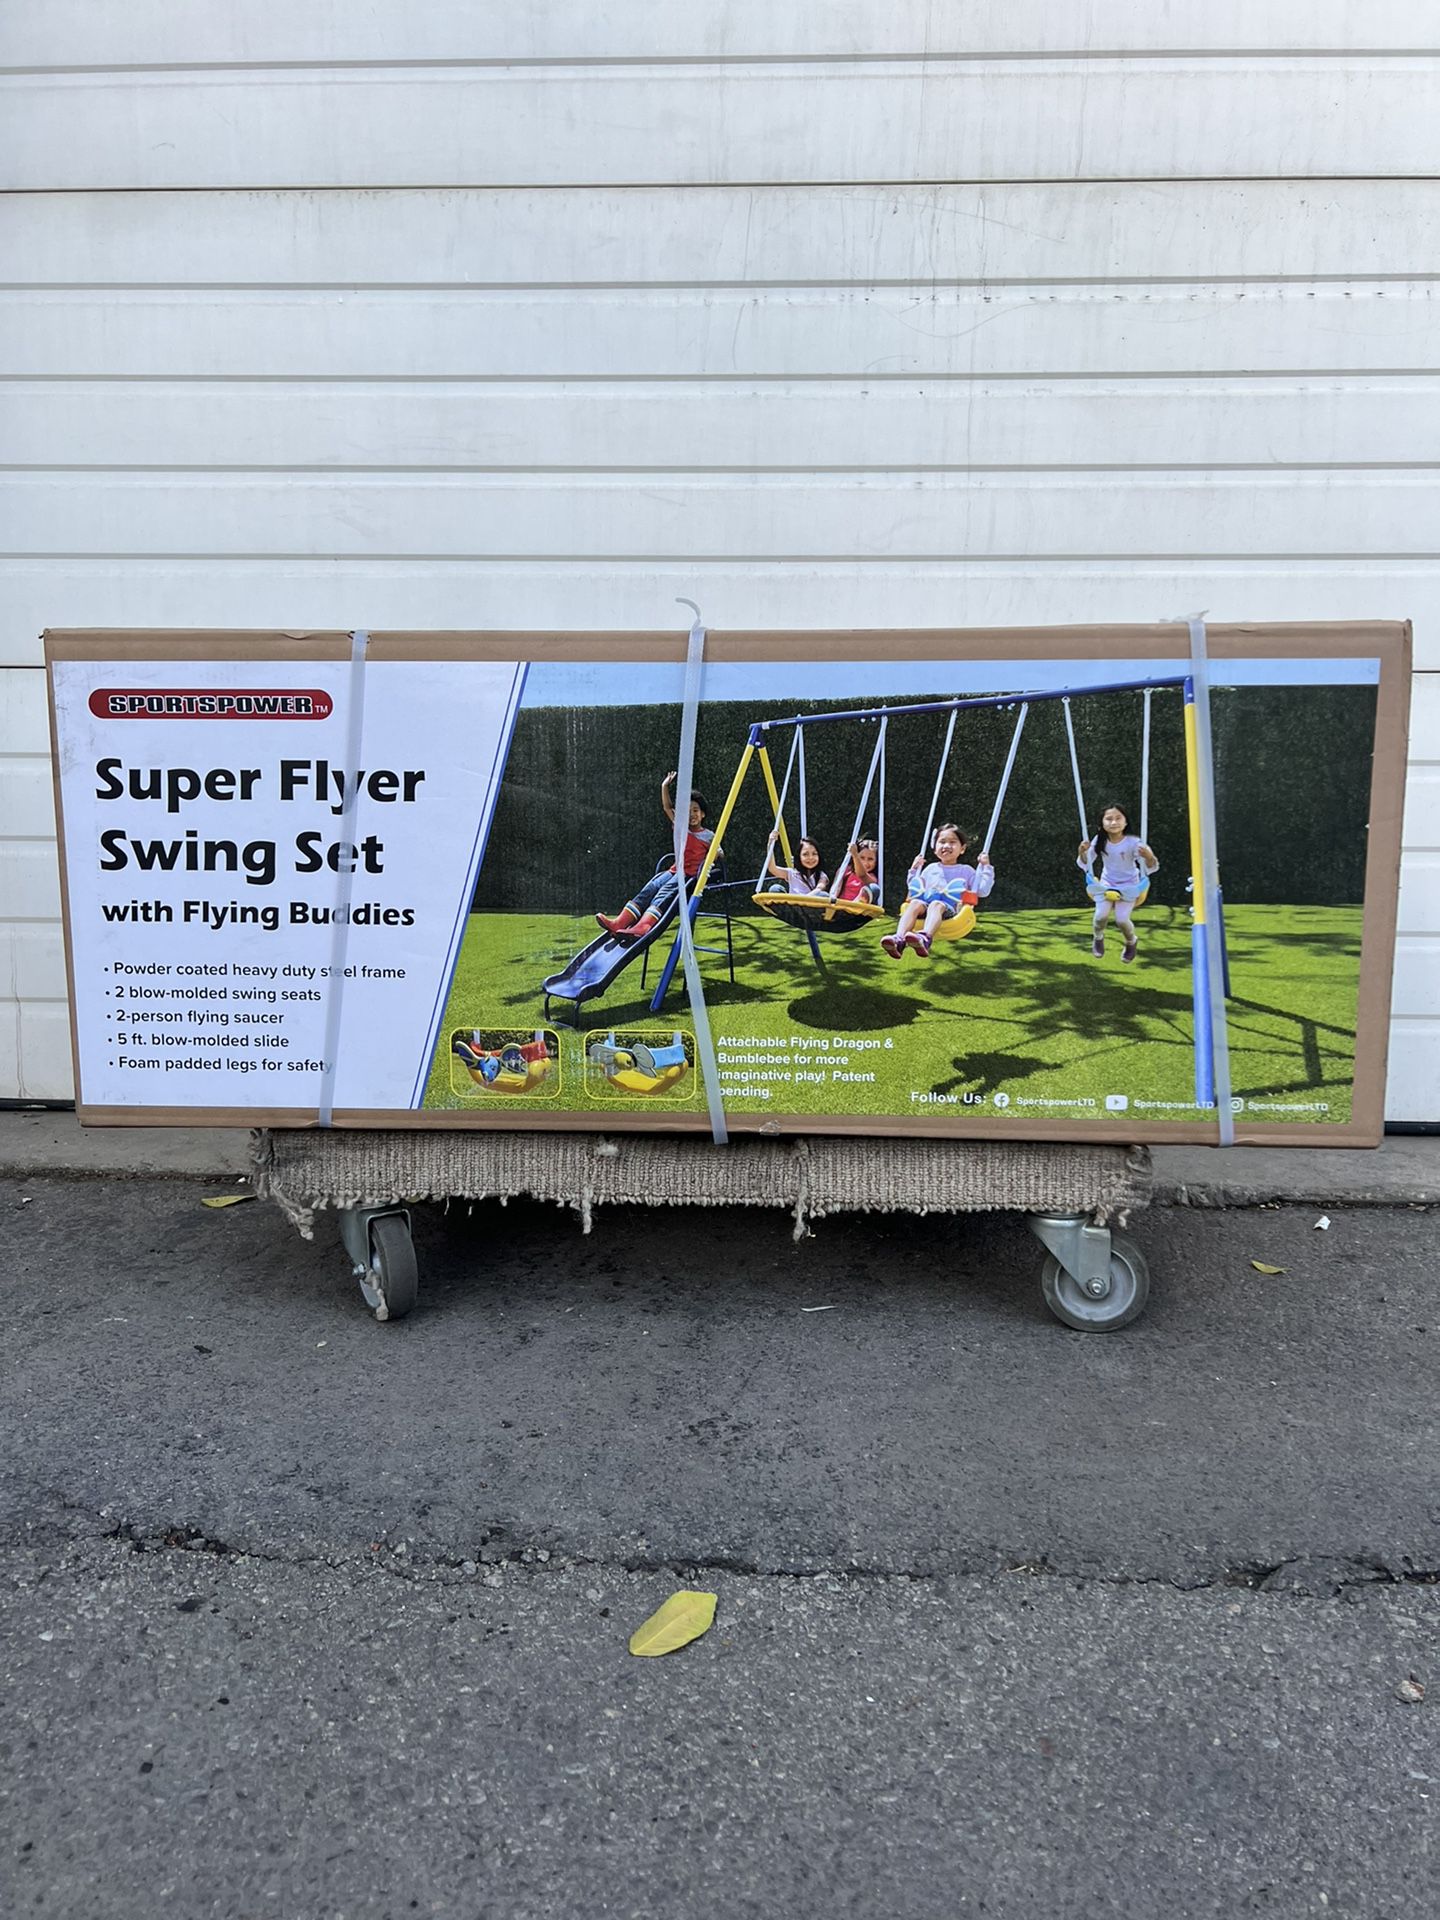 Sportspower Super Flyer Swing Set with 2 flying buddies, saucer swing, 5ft blow molded slide and 2 swings